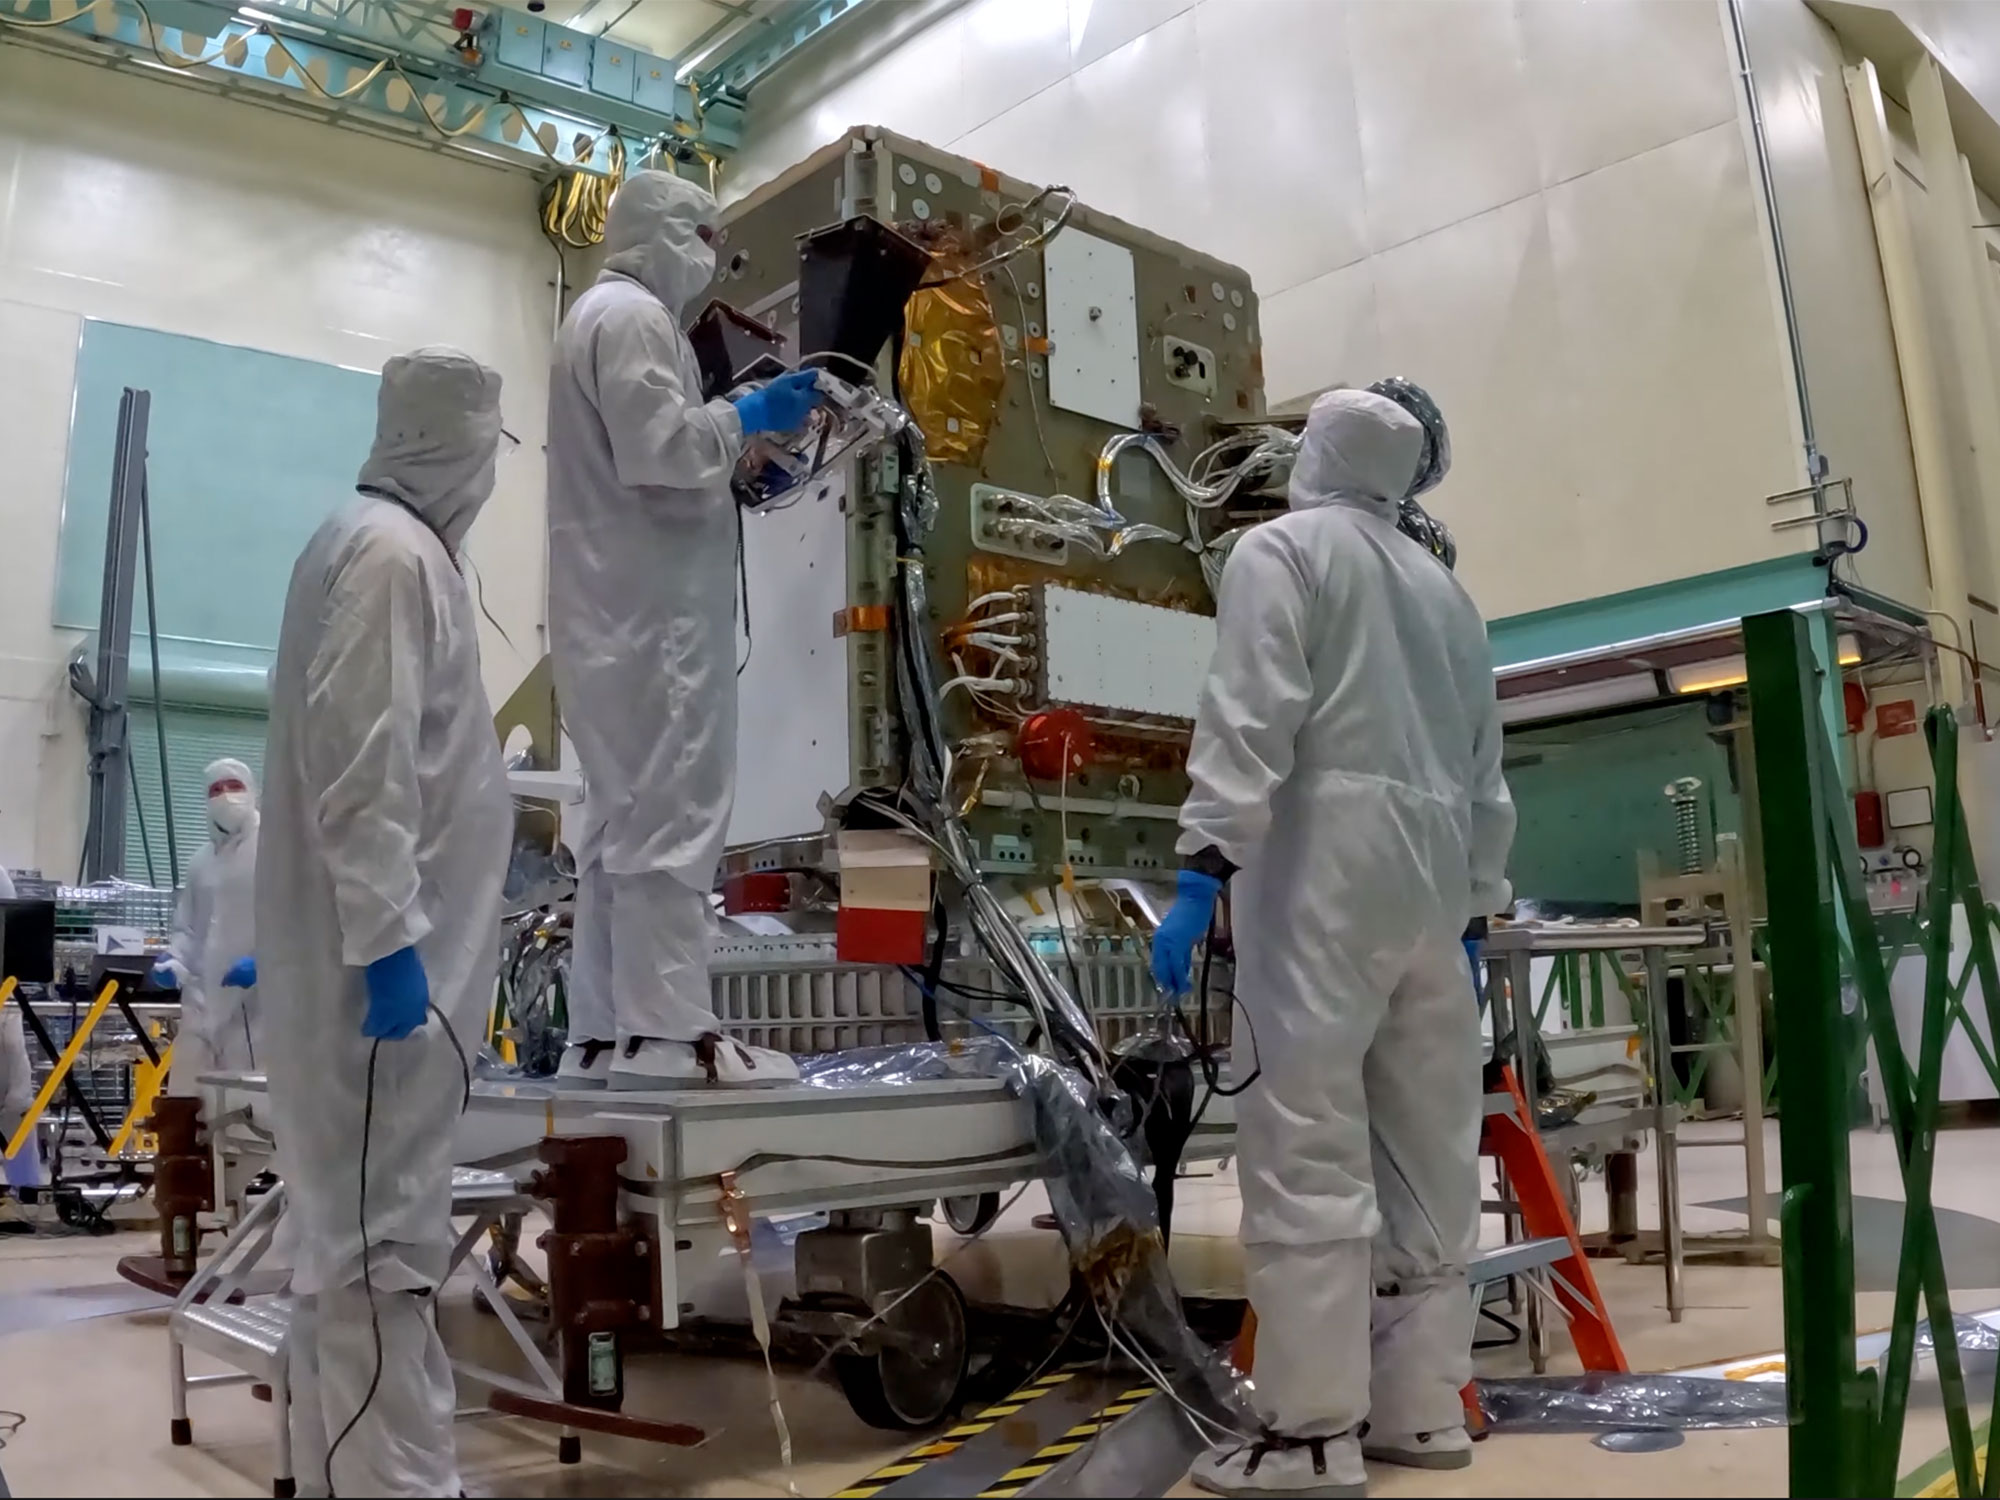 Time-lapse video of installing the Bus Star Tracker Sensor (STS) on the -Z Panel of the PACE spacecraft at NASA Goddard Space Flight Center.